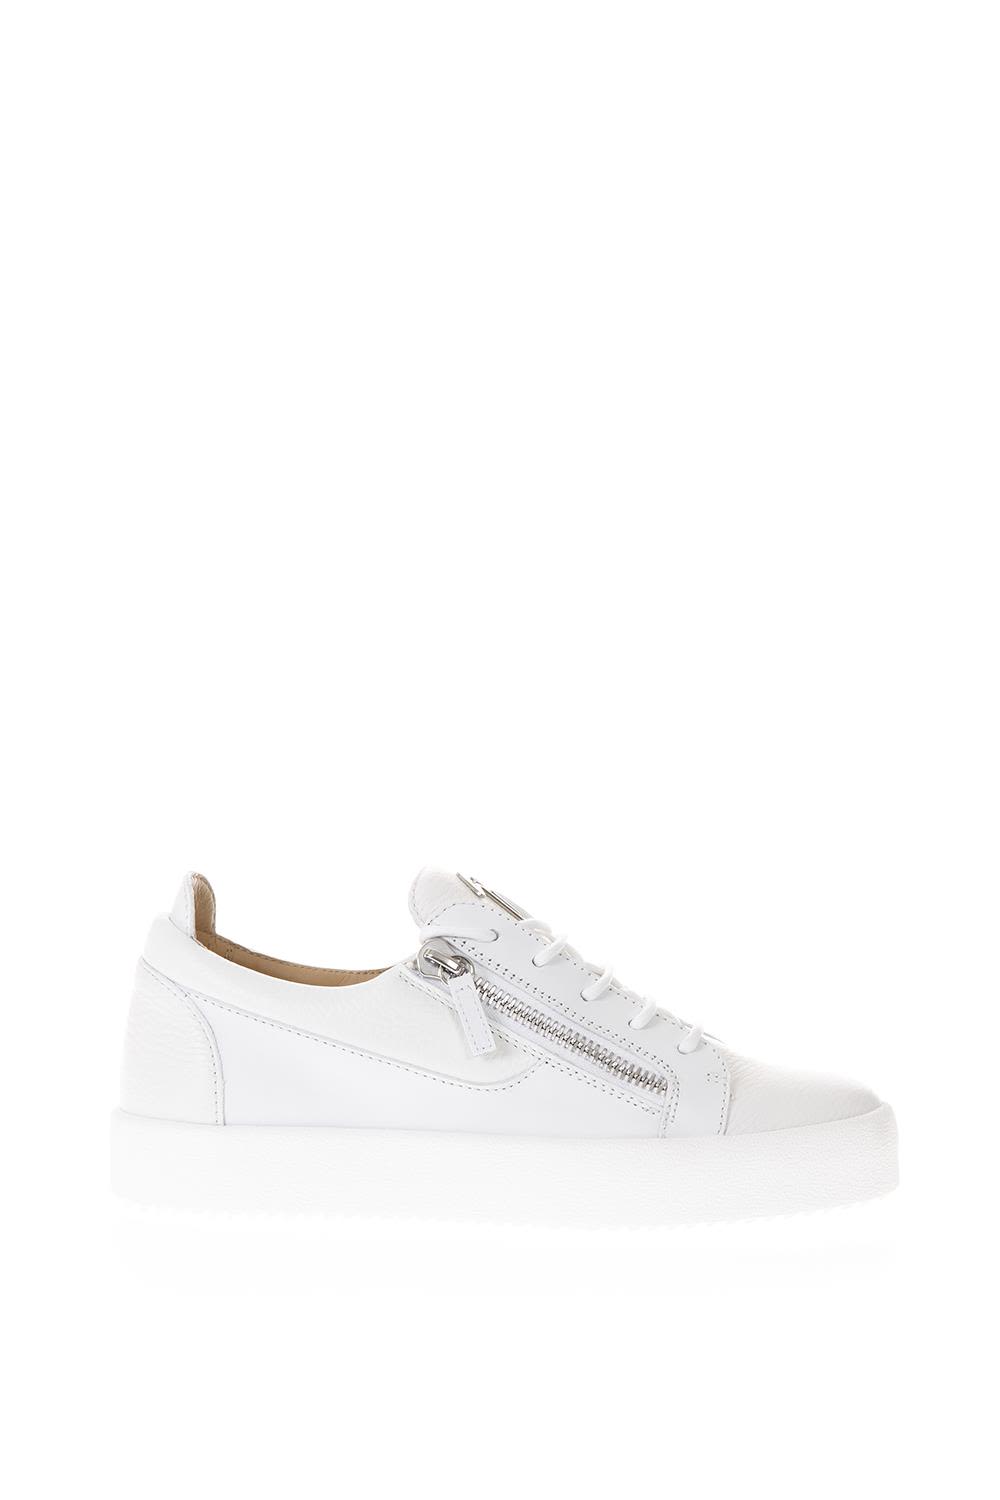 Giuseppe Zanotti Men's Croc-embossed Leather Low-top Sneakers In White ...